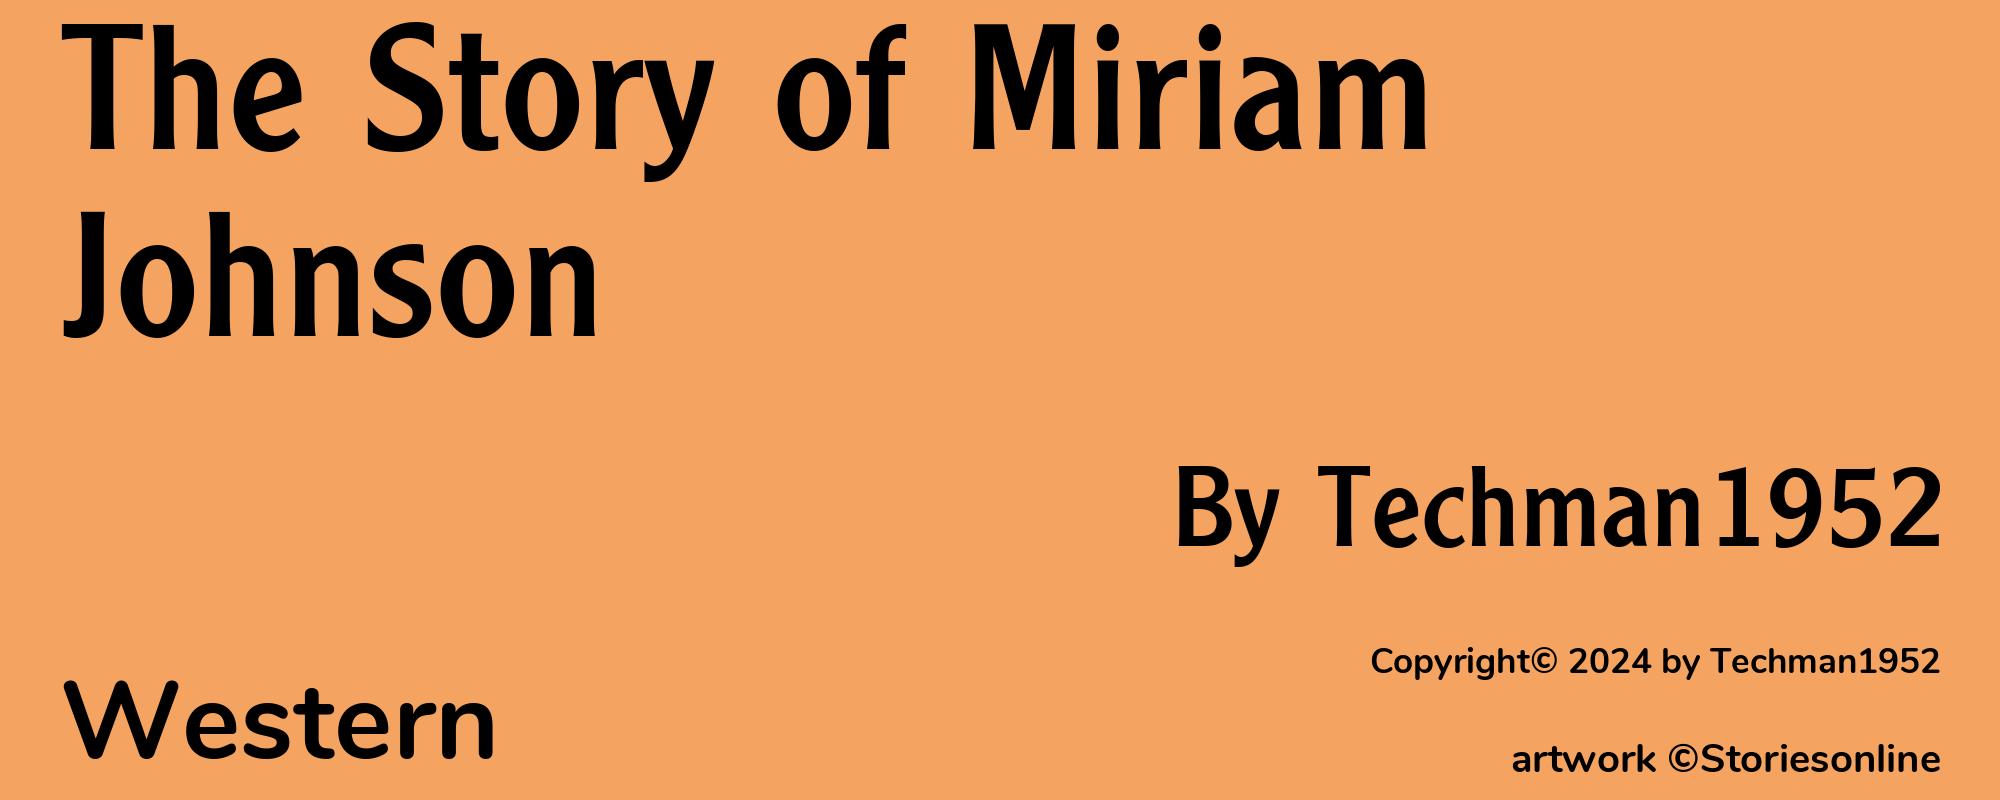 The Story of Miriam Johnson - Cover